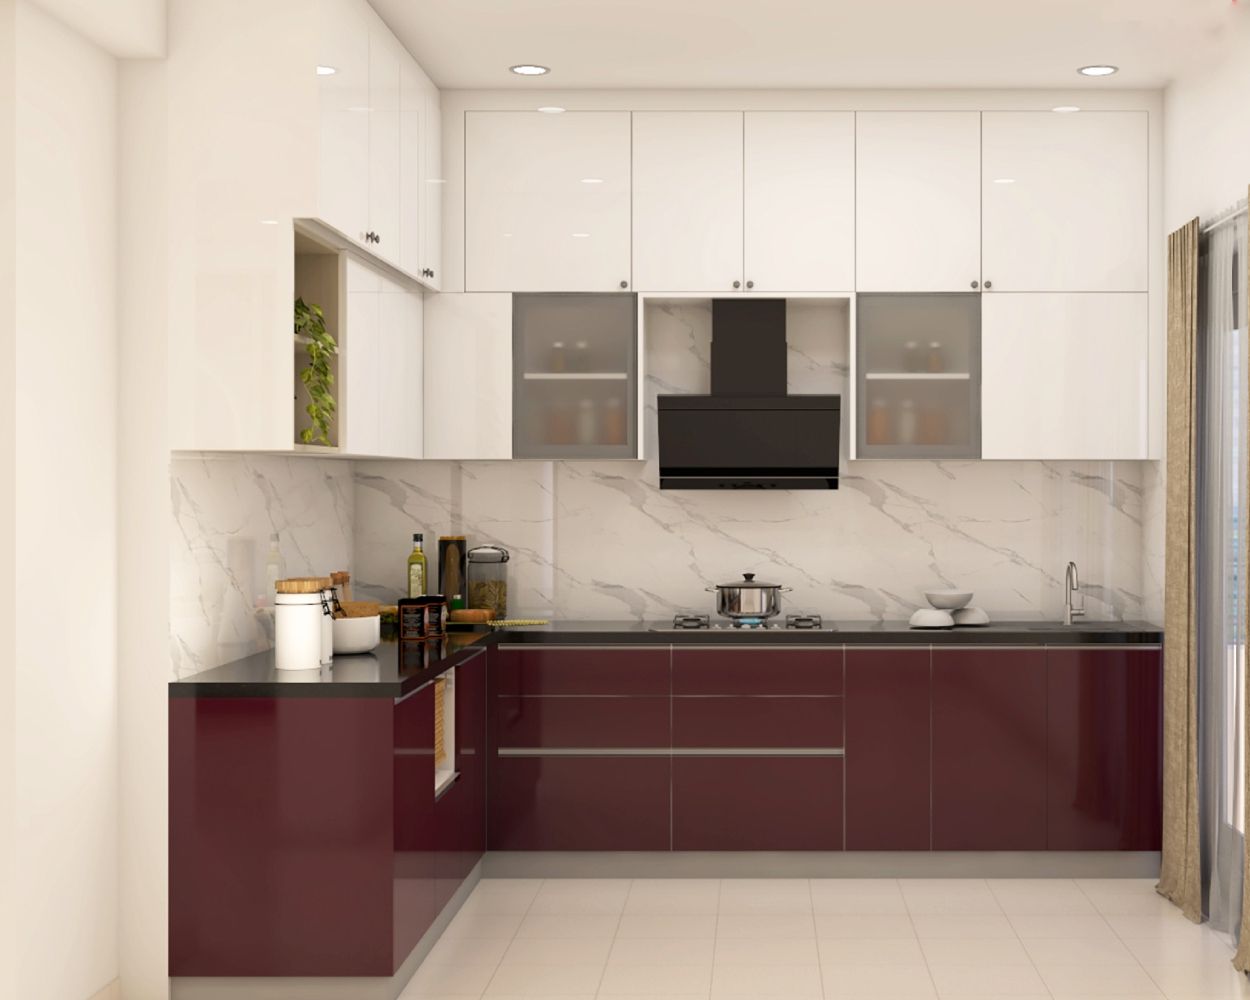 Modern L-Shaped Kitchen Design With A Granite Countertop